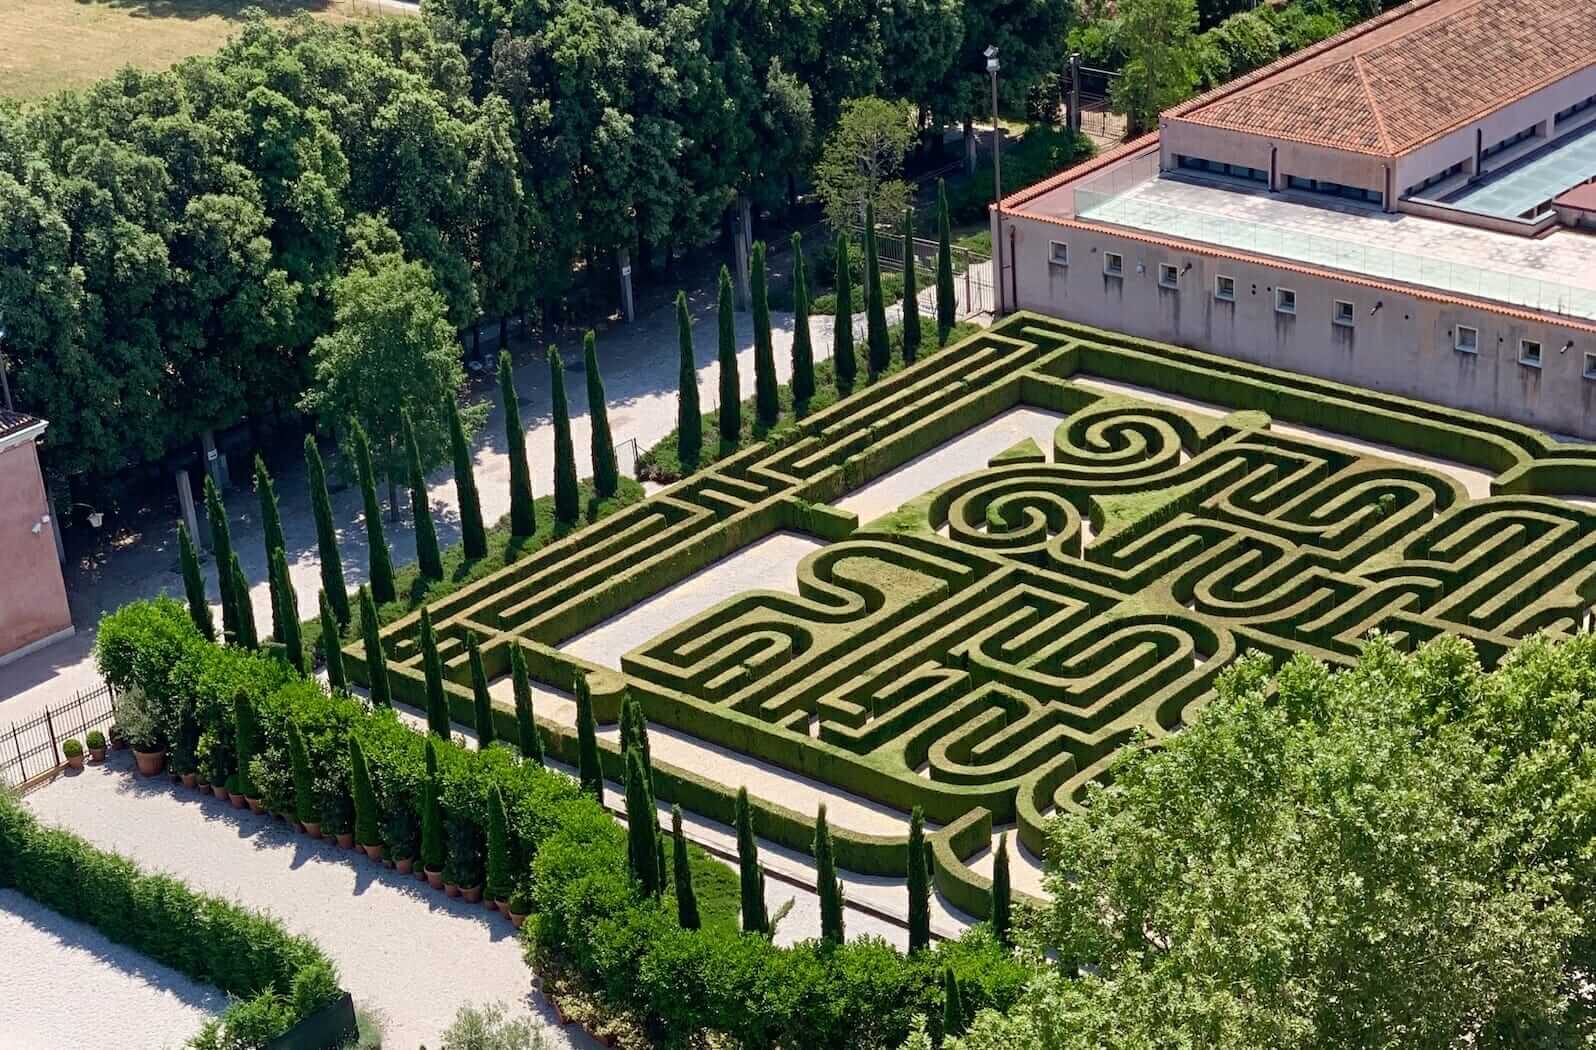 The Borges Labyrinth